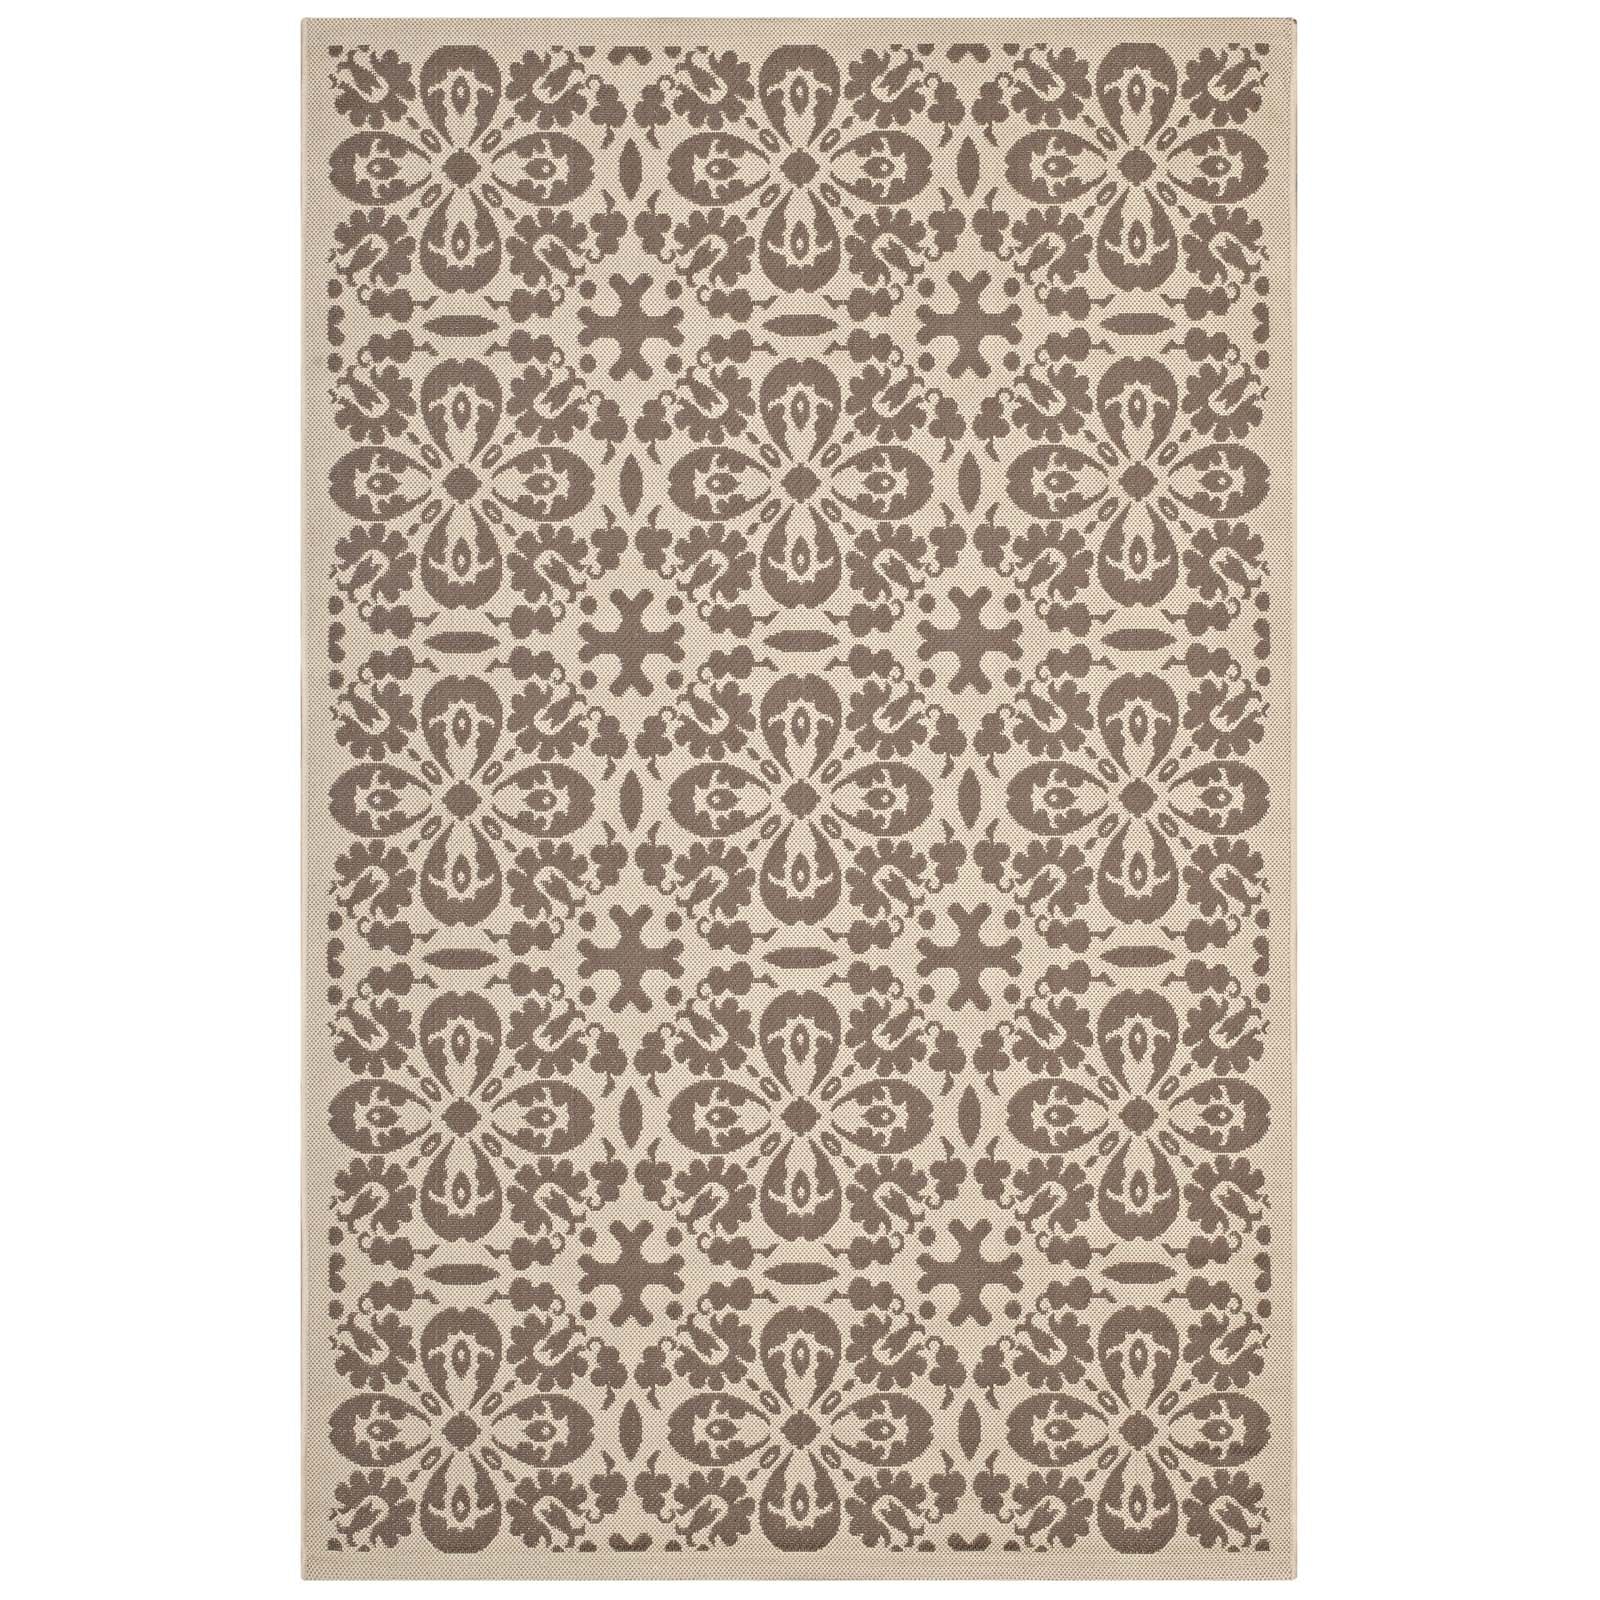 Modway Outdoor Rugs - Ariana Vintage Floral Trellis 9'x12' Outdoor Area Rug Beige